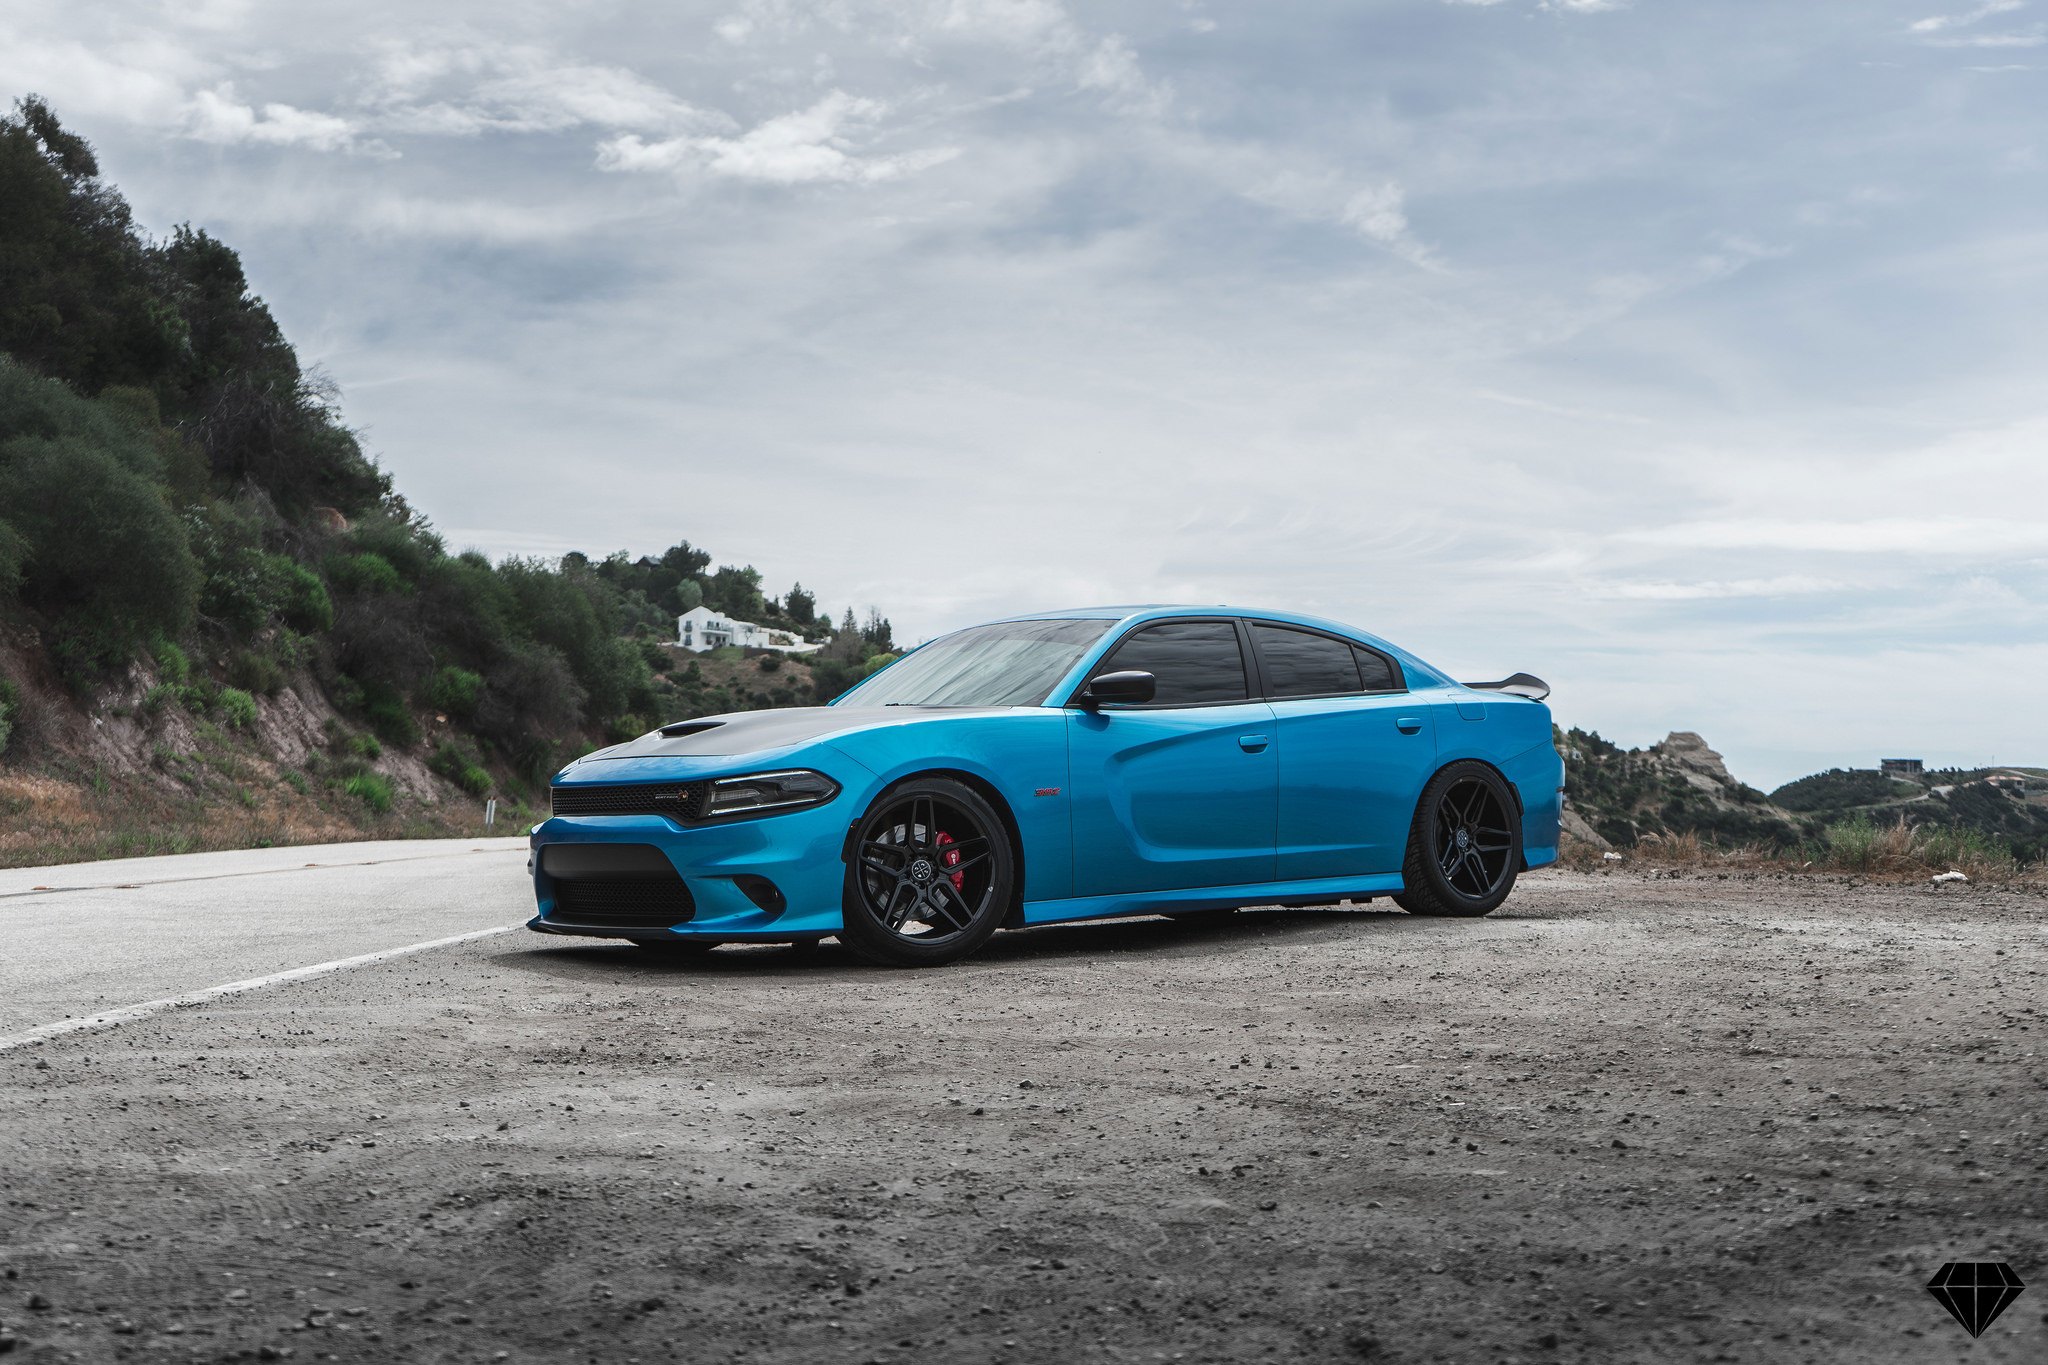 Blue Dodge Charger with Aftermarket Side Skirts - Photo by Blaque Diamond Wheels